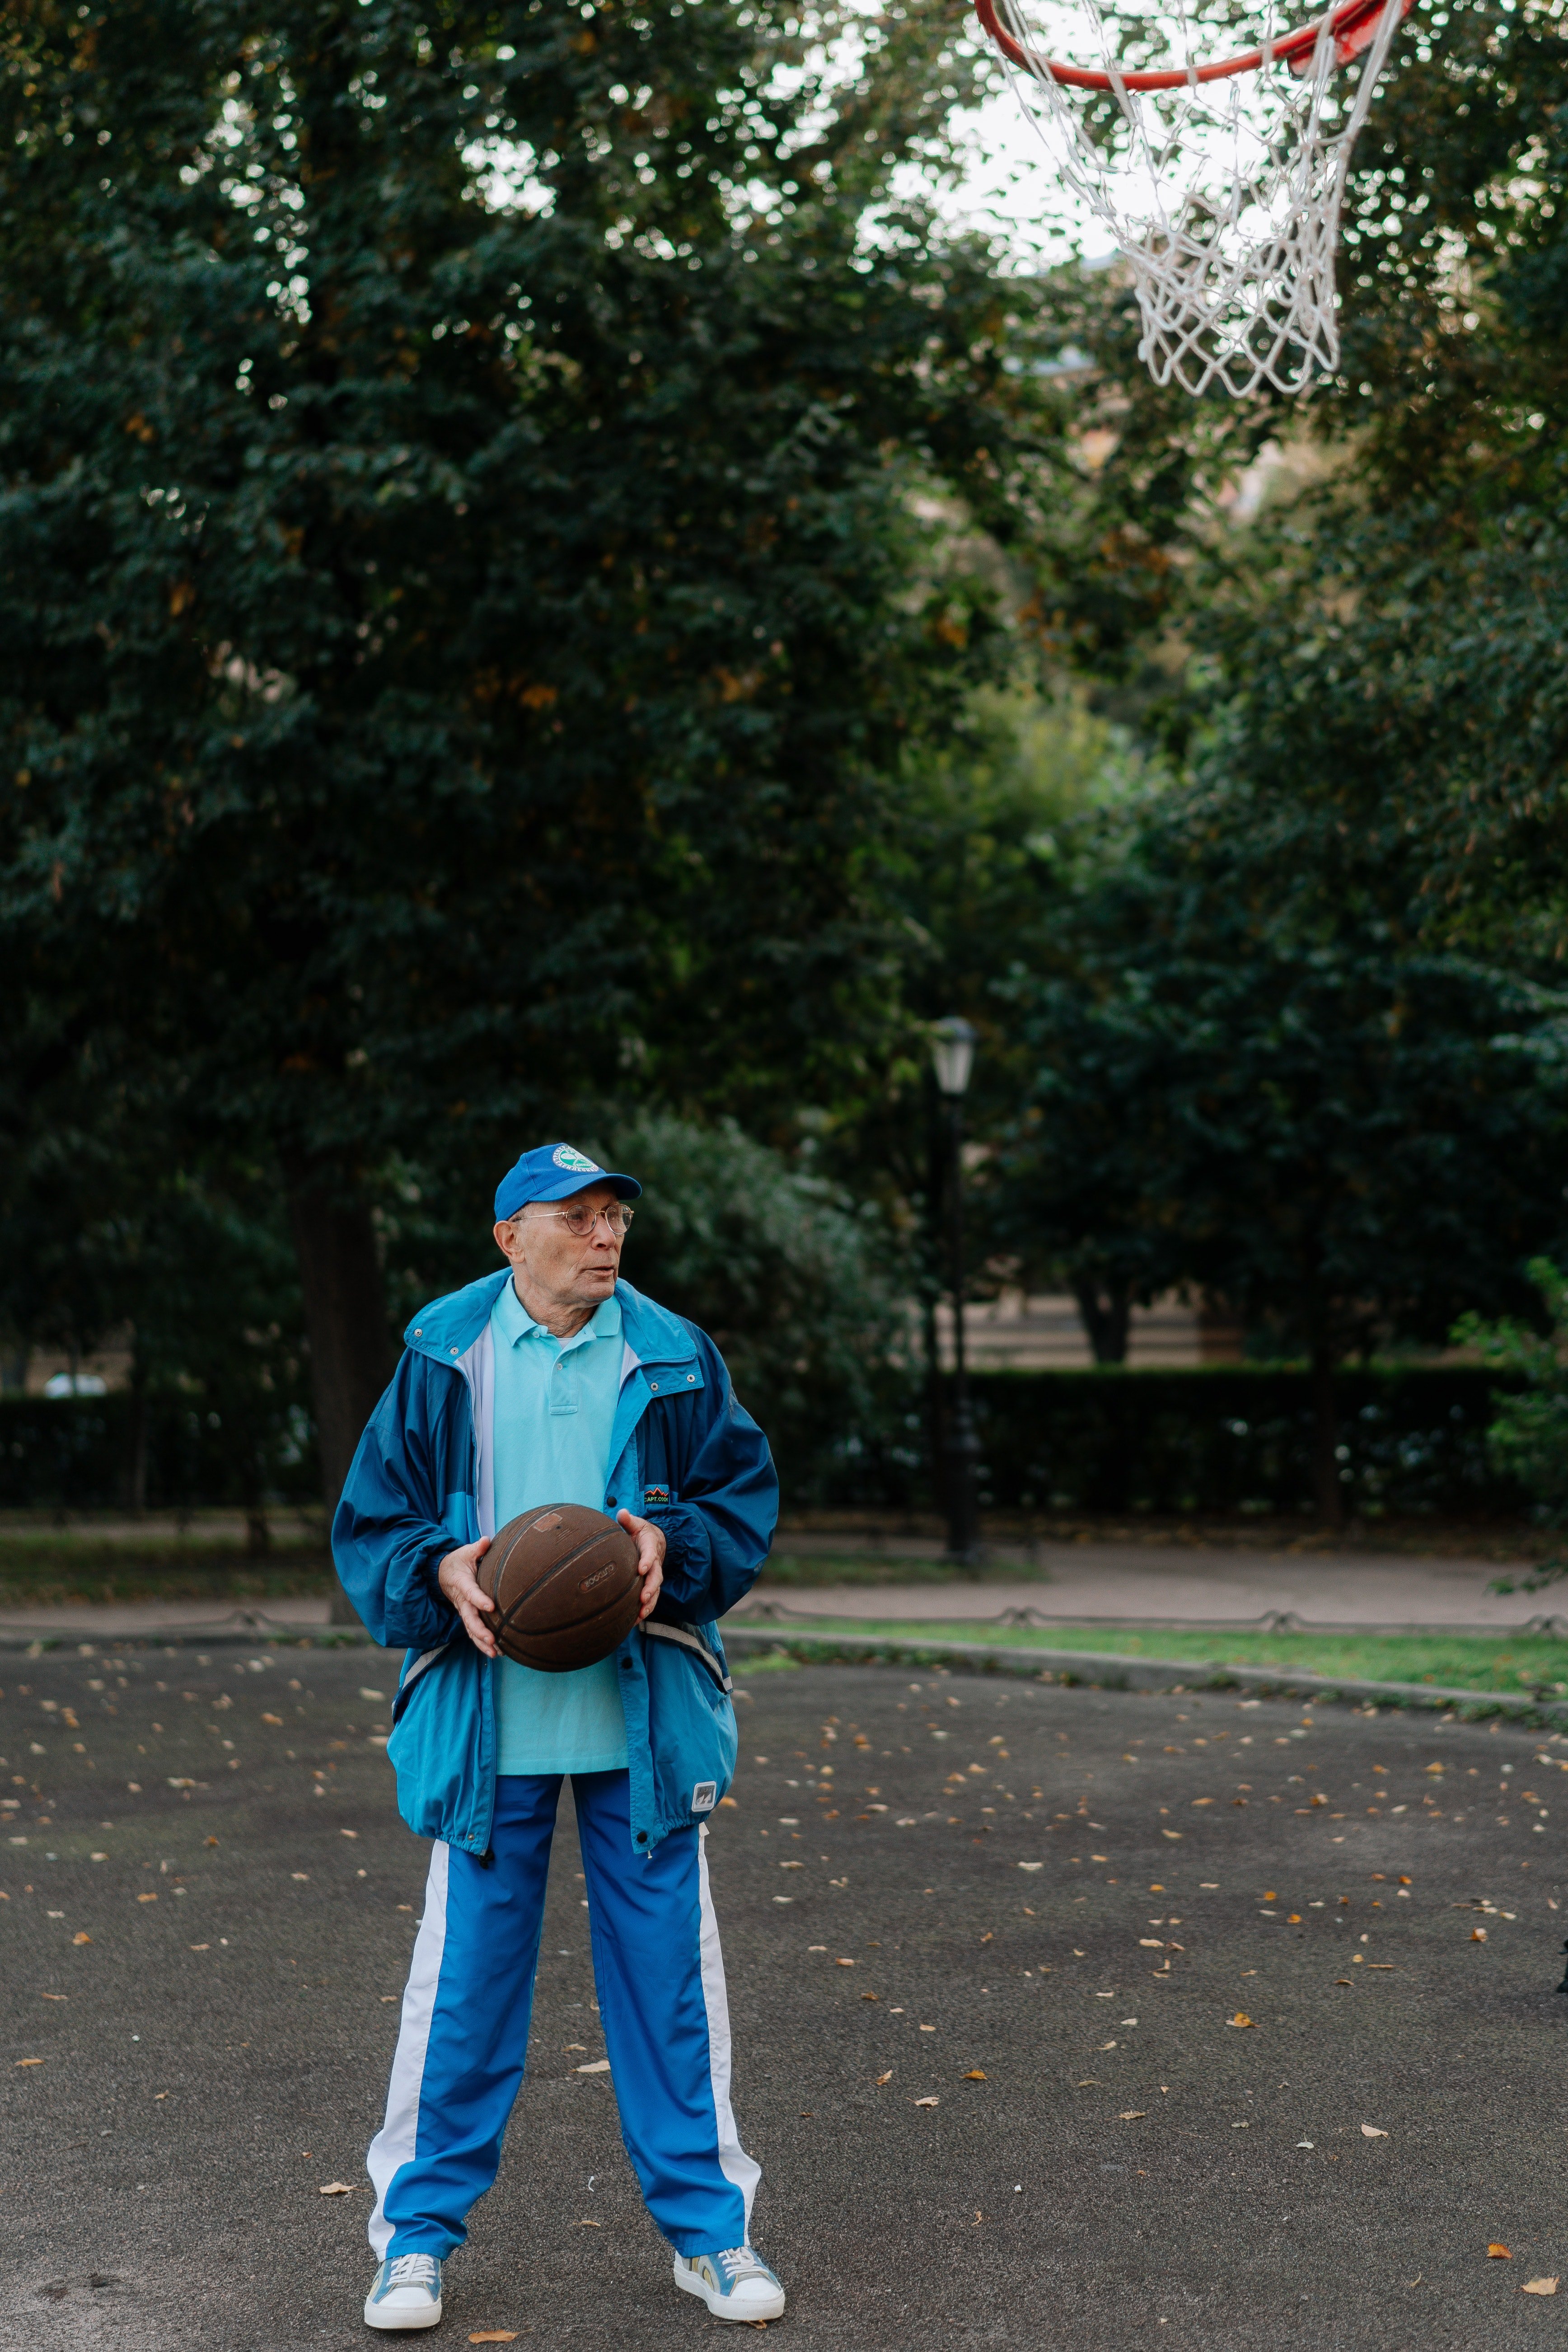 An old man holding a ball | Photo: Pexels